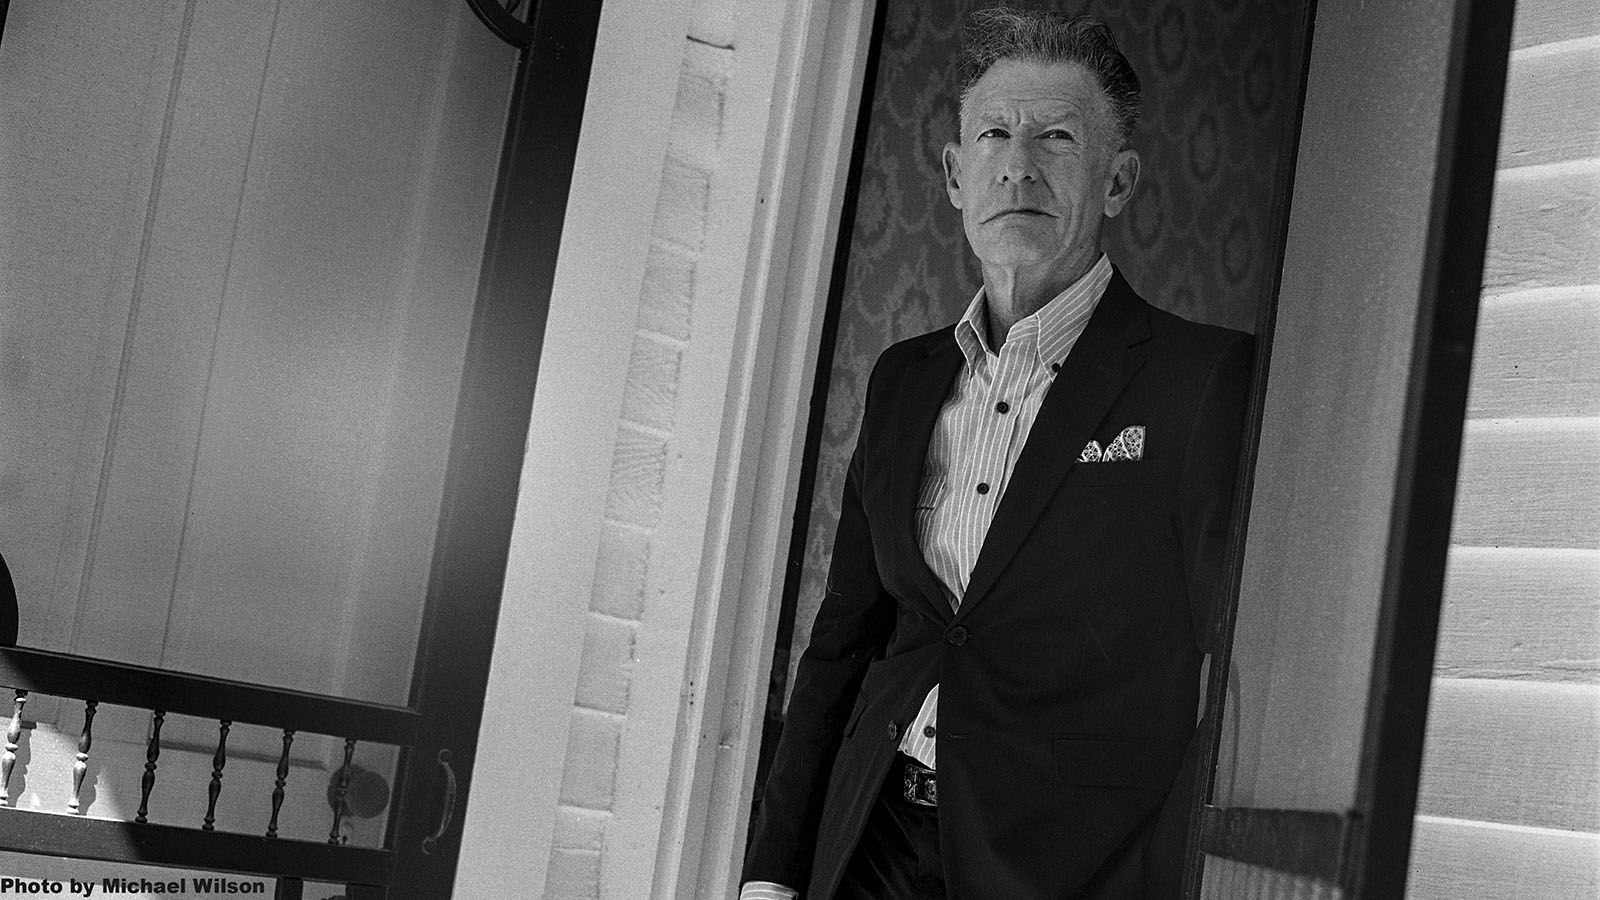 Lyle Lovett, pictured, will be joined by Leo Kottke on Thursday, Oct. 26, for an acoustic performance at Honeywell Center in Wabash.